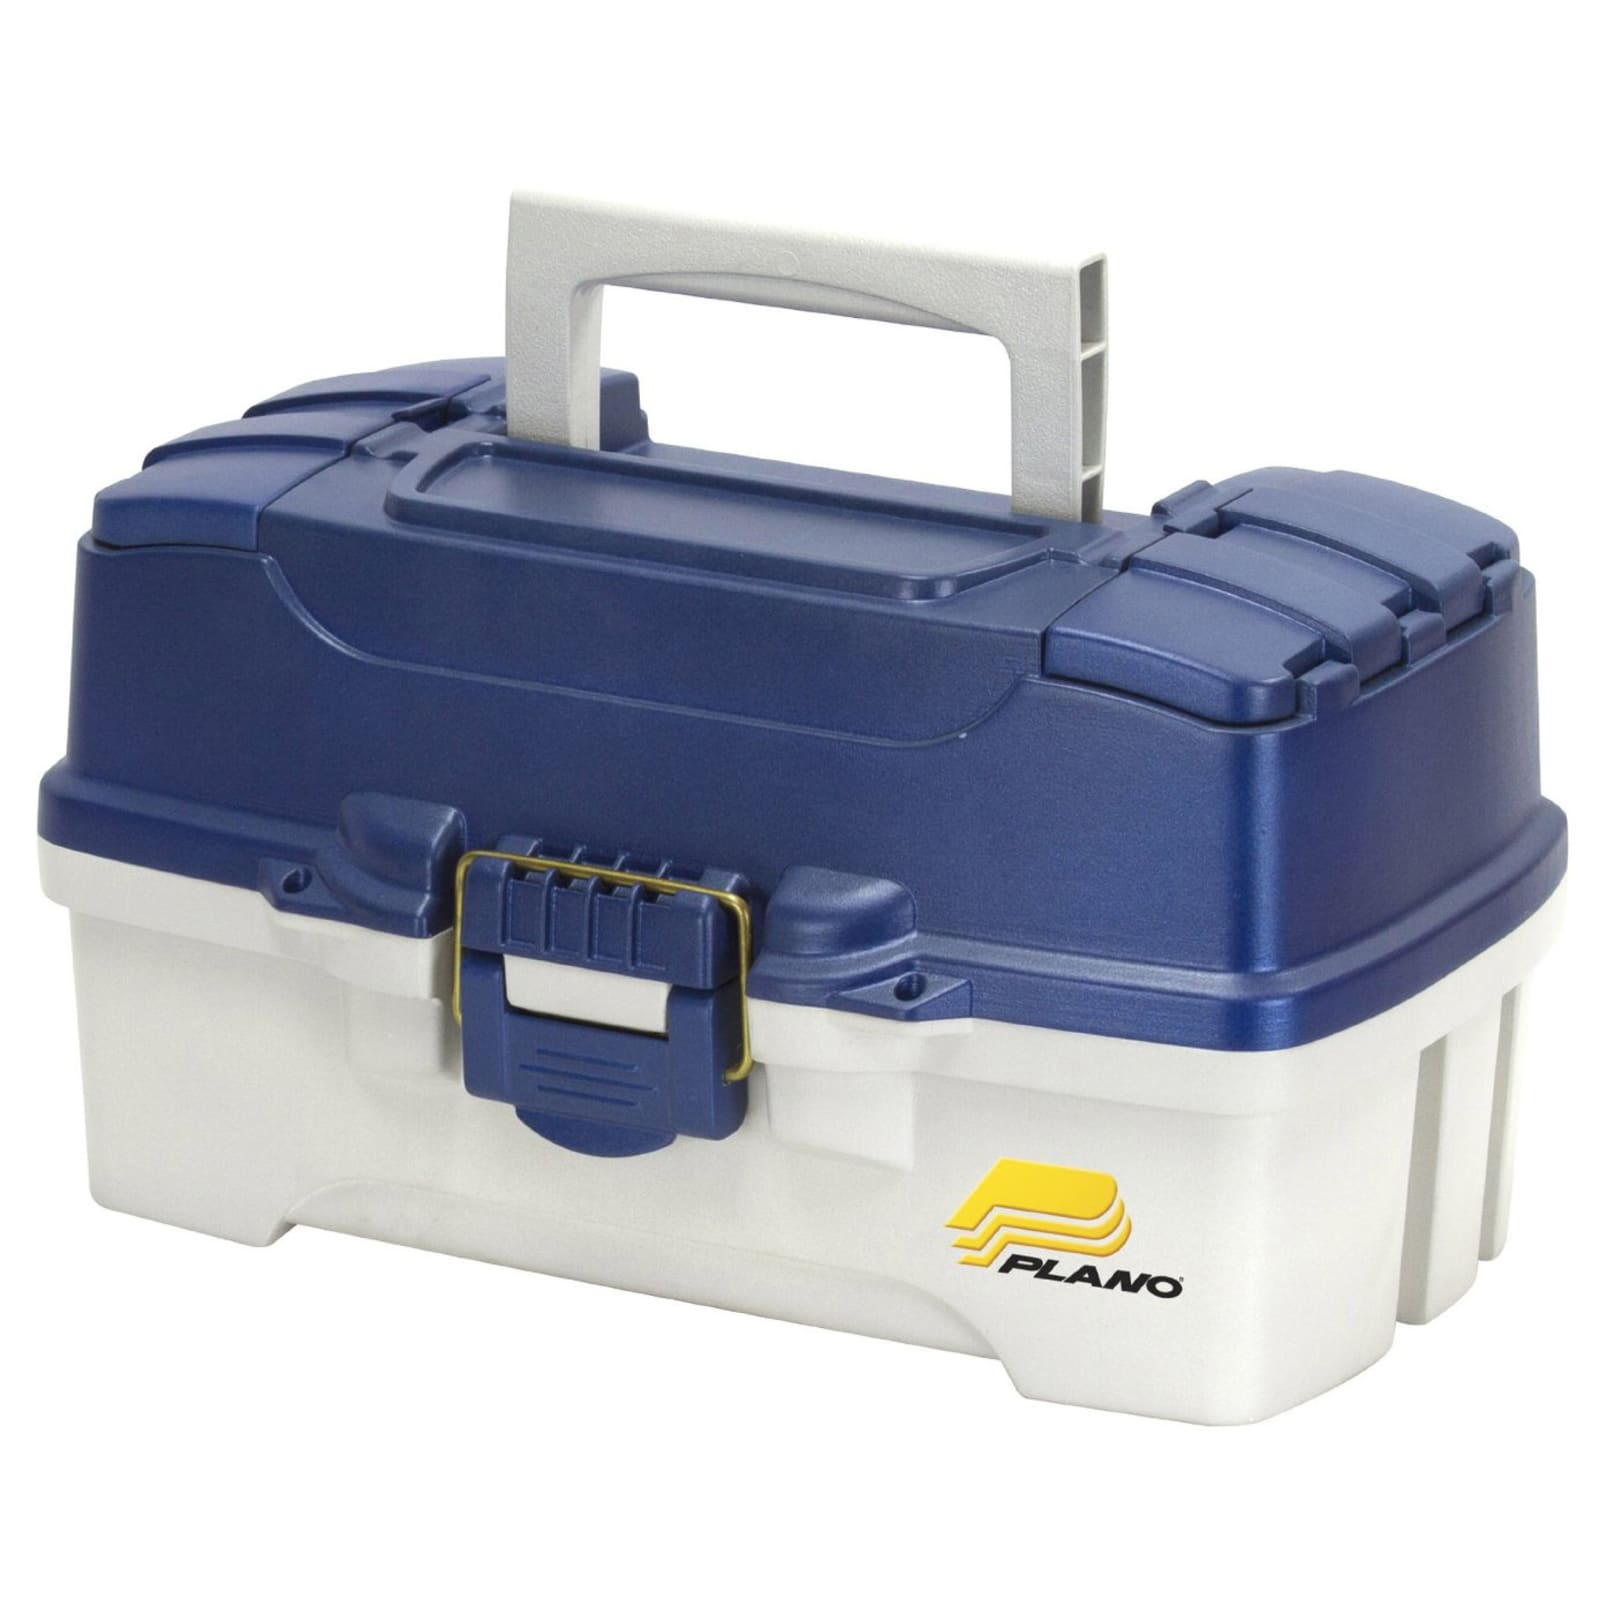 2-Tray Blue Metallic/Off-White w/ Top Access Tackle Box by Plano